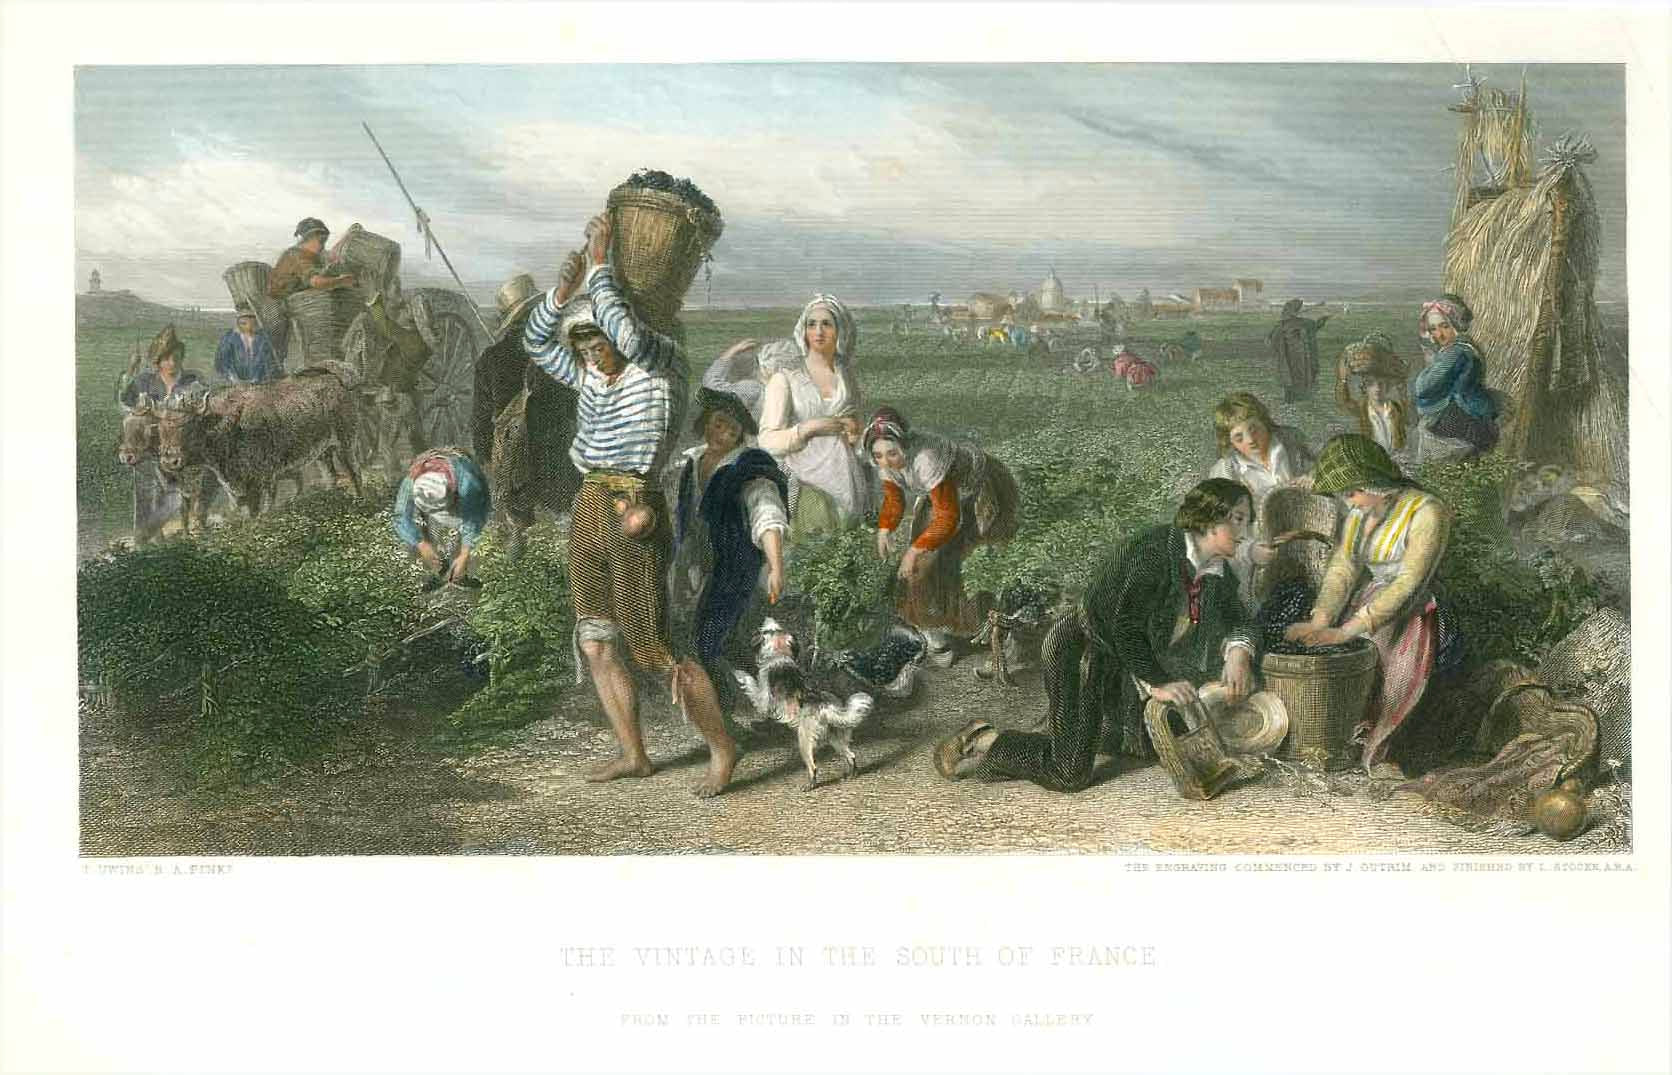 "The Vintage in the South of France"  Handsomely hand-colored steel engraving by John Outrim (1840-1874) and finished by Lumb Stocks (1812-1892)  After the painting by Thomas Uwins (1792-1857)  London, ca. 1865, Original antique print , interior design, wall decoration, ideas, idea, gift ideas, present, vintage, charming, special, decoration, home interior, living room design